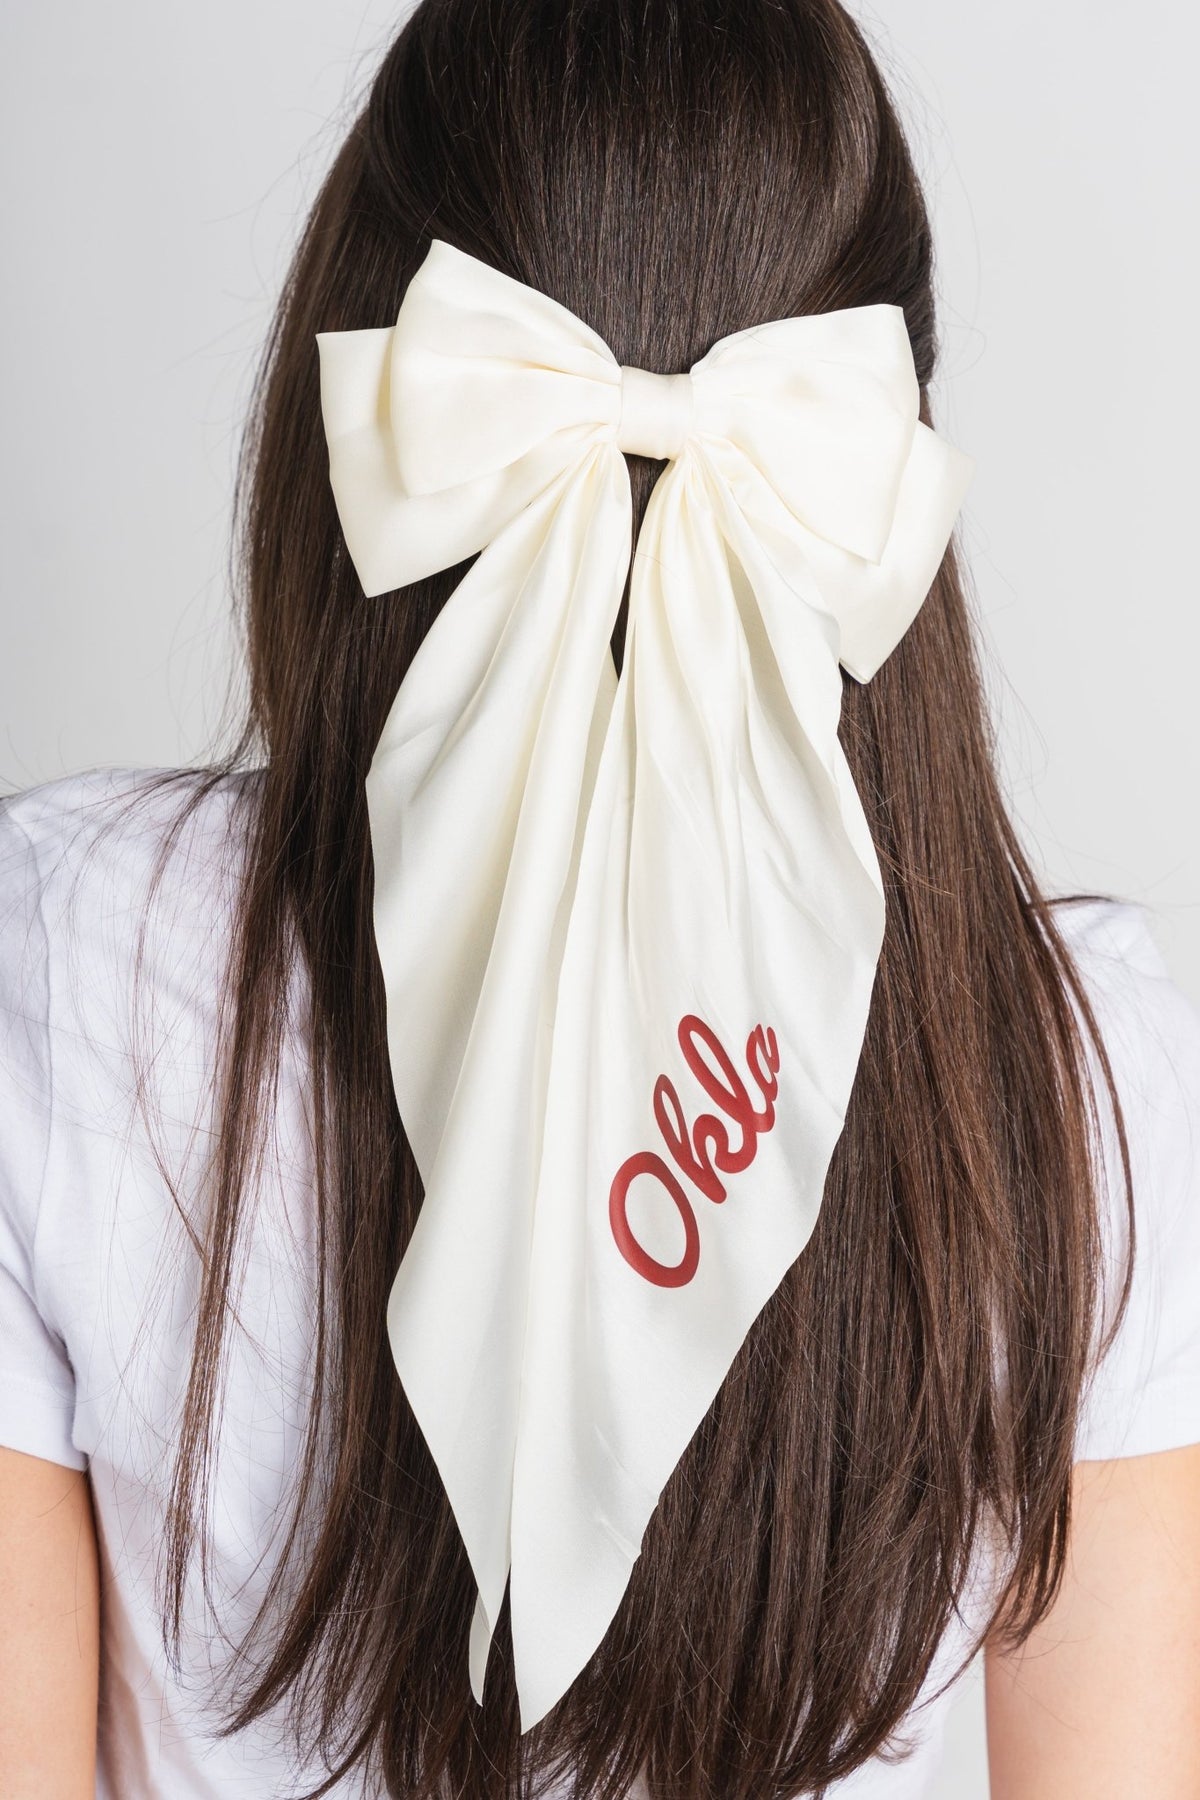 OKLA game day hair bow cream - Trendy Gifts at Lush Fashion Lounge Boutique in Oklahoma City